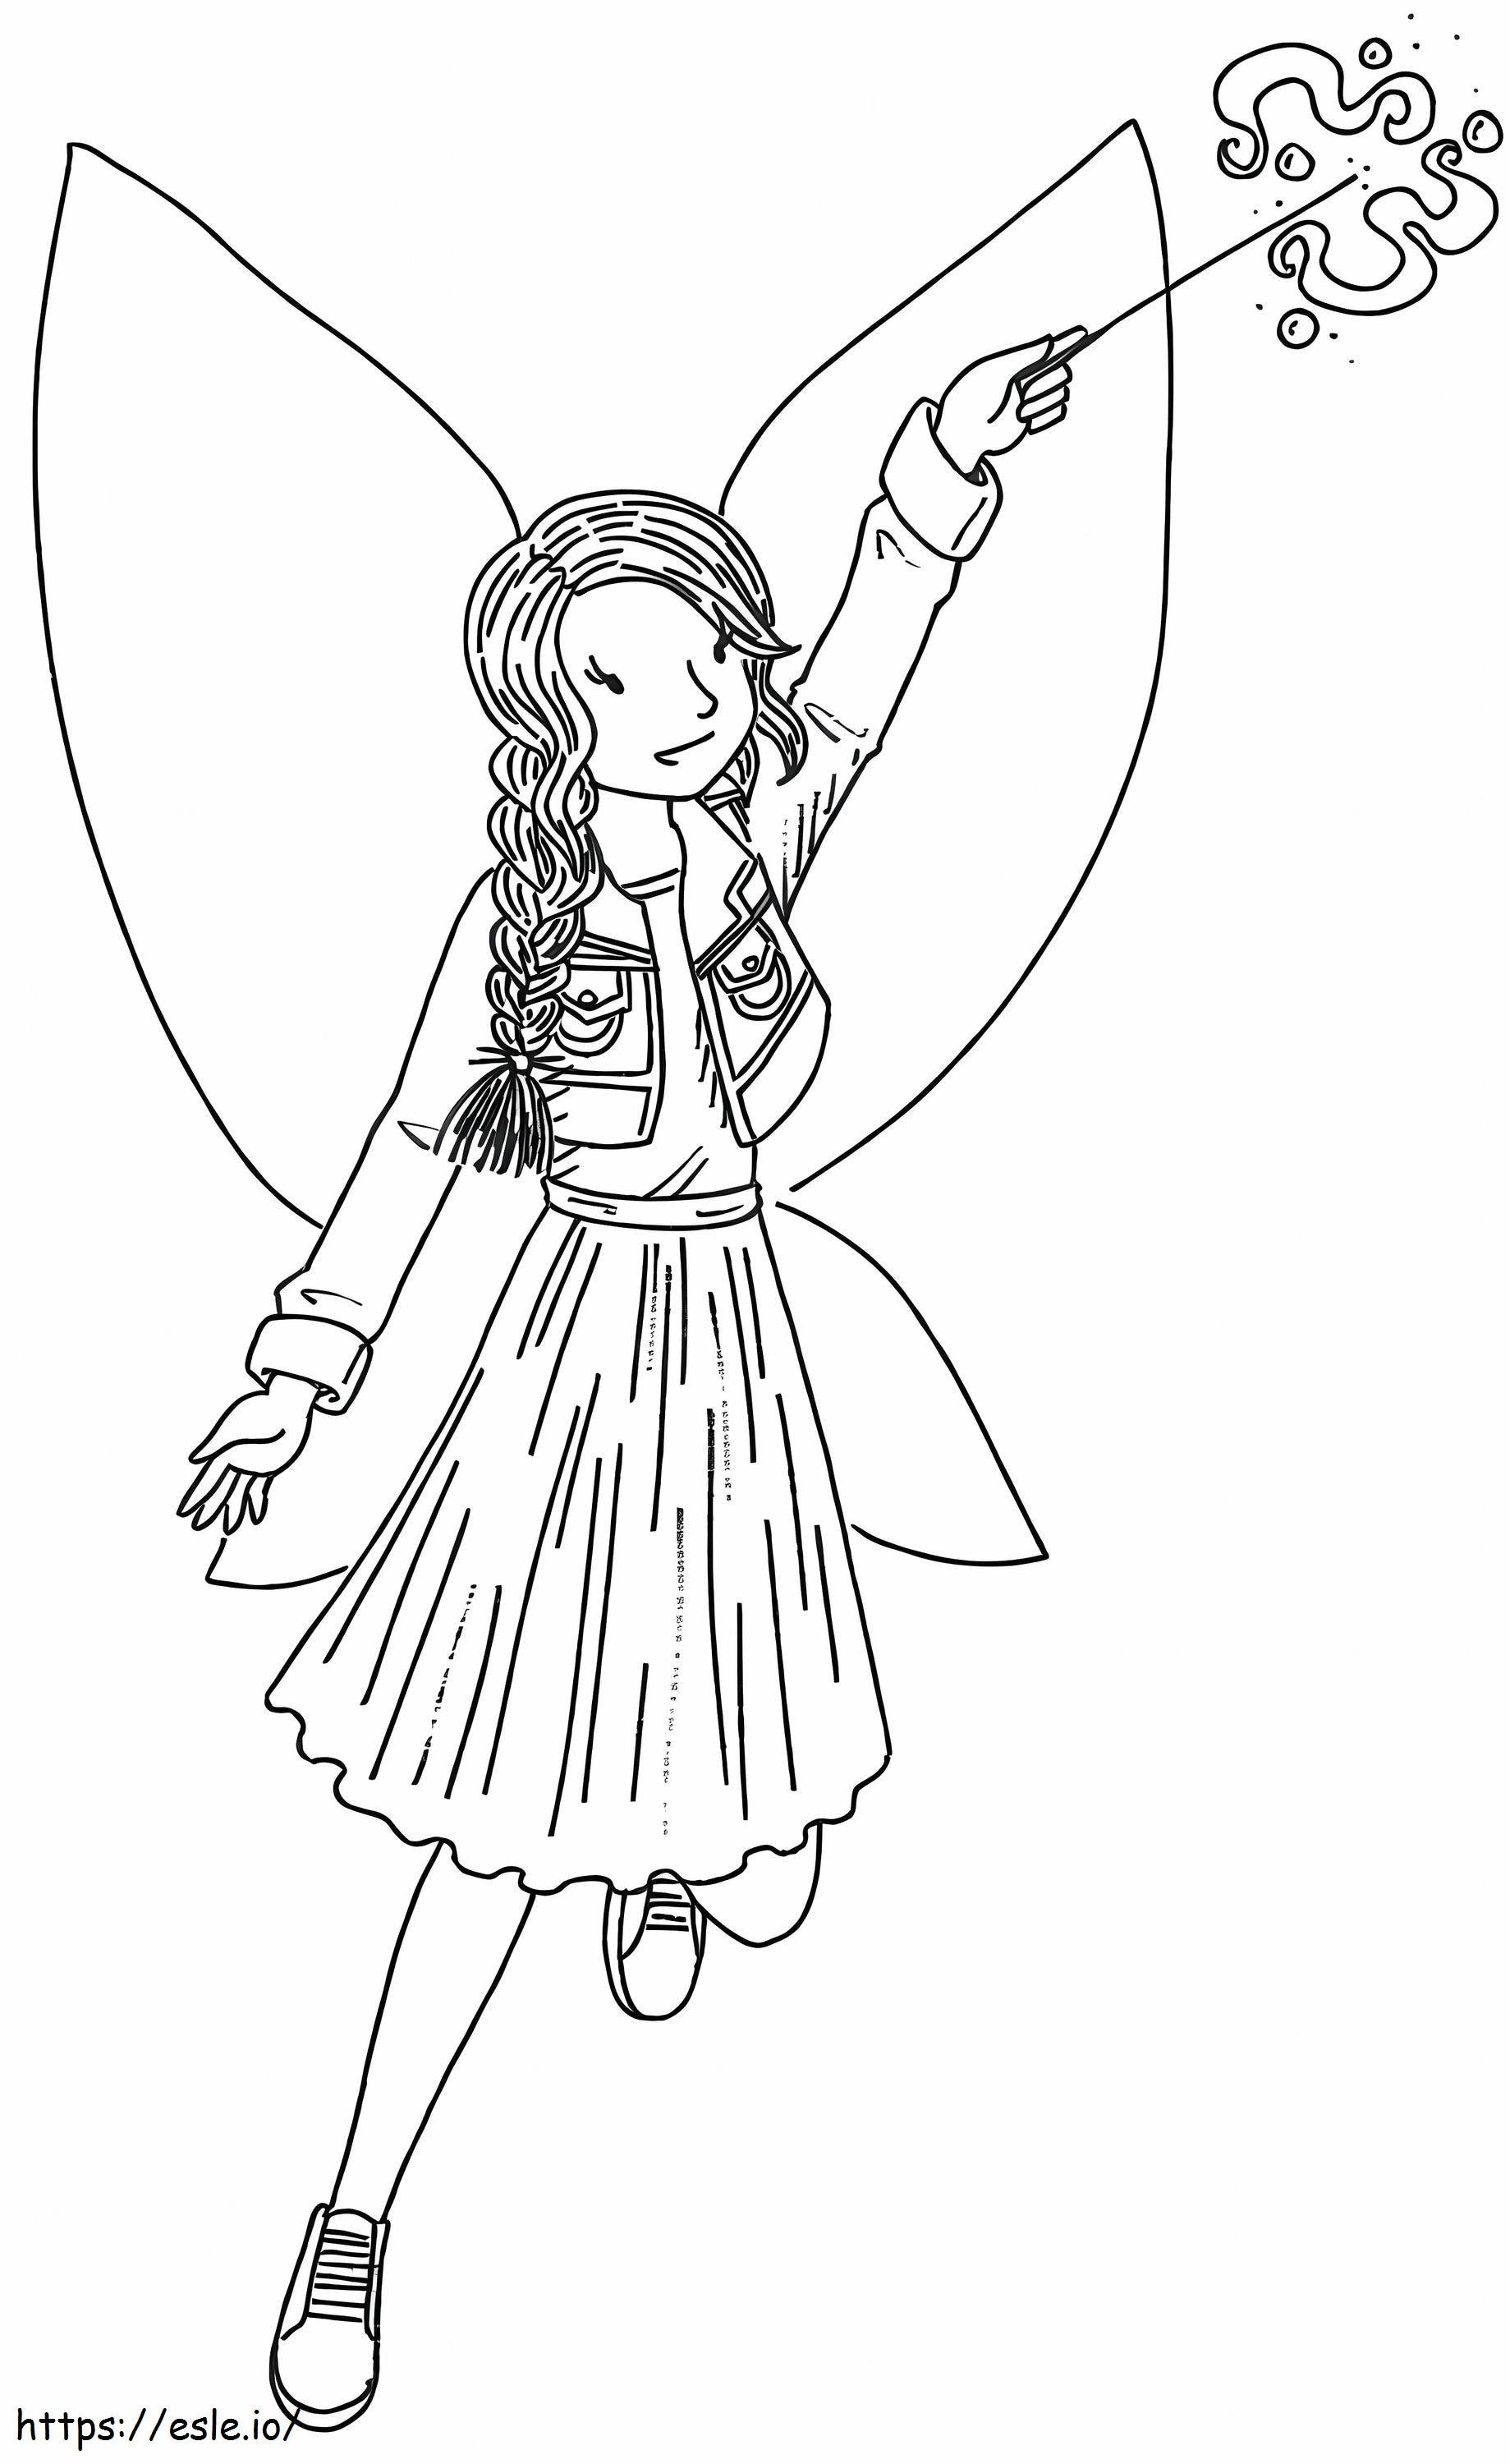 Evelyn The Mermicorn Fairy coloring page